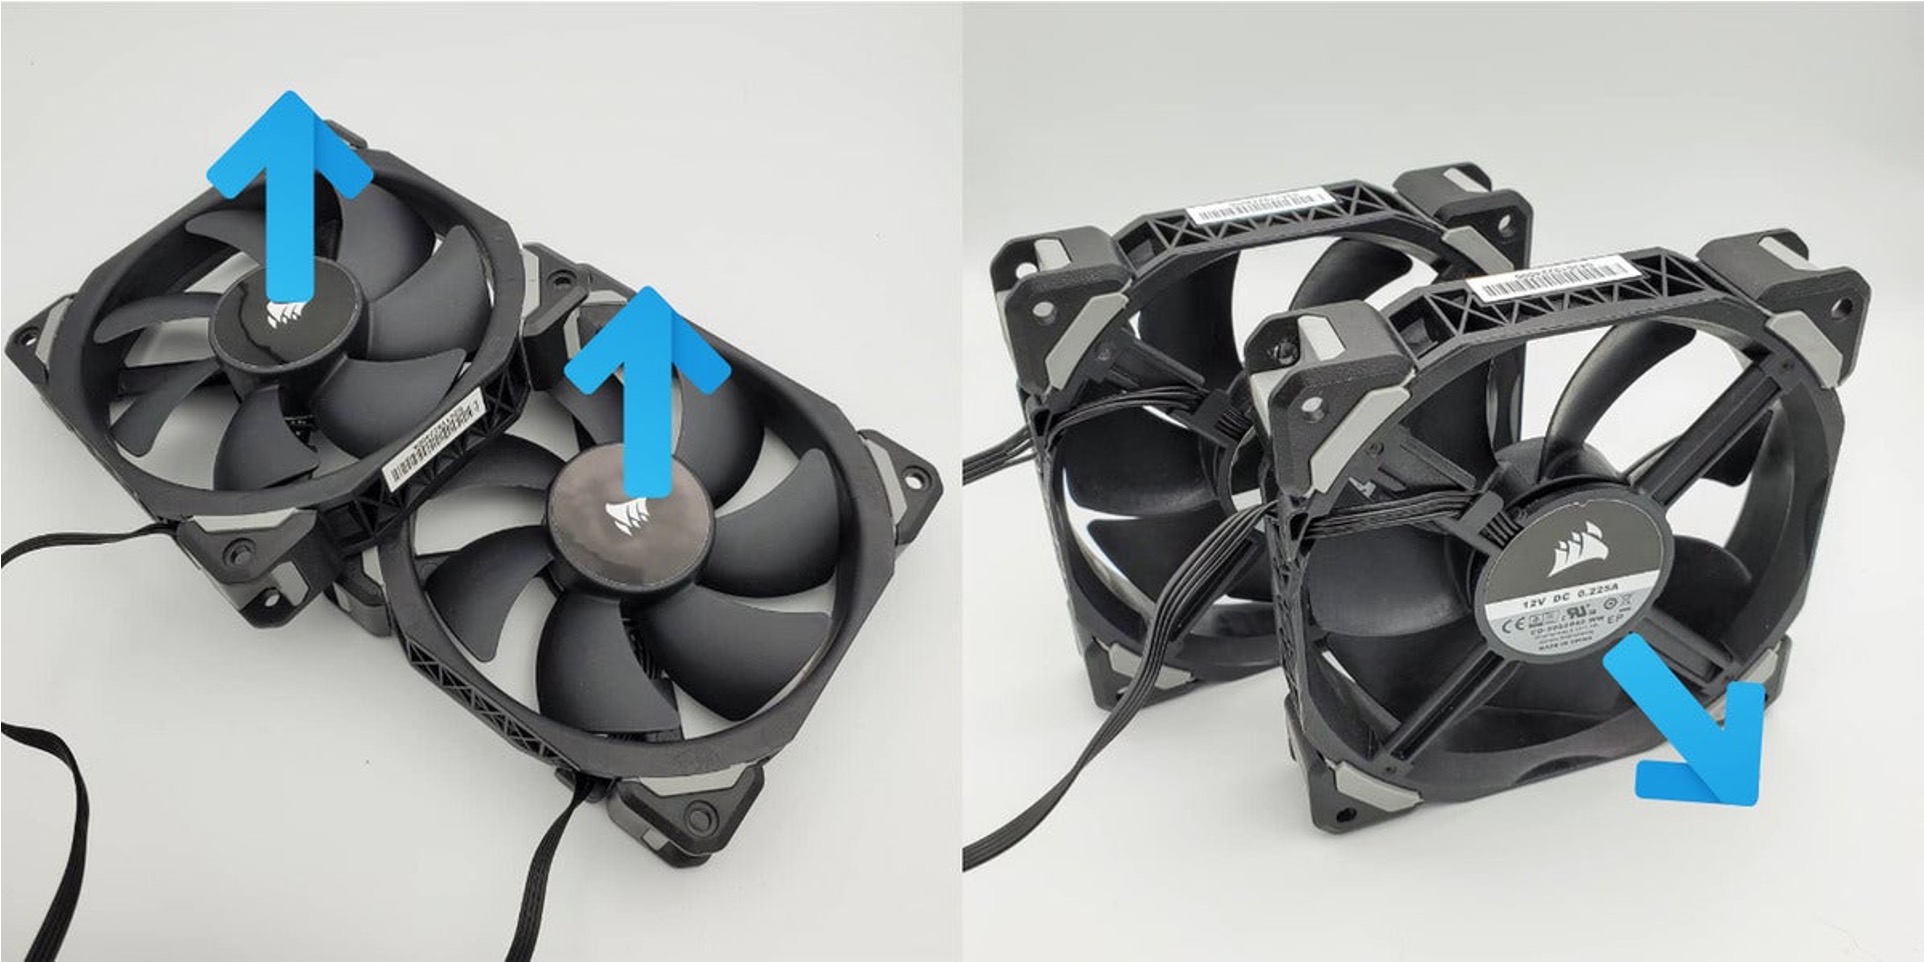 How Do I Know Which Way A Case Fan Blows